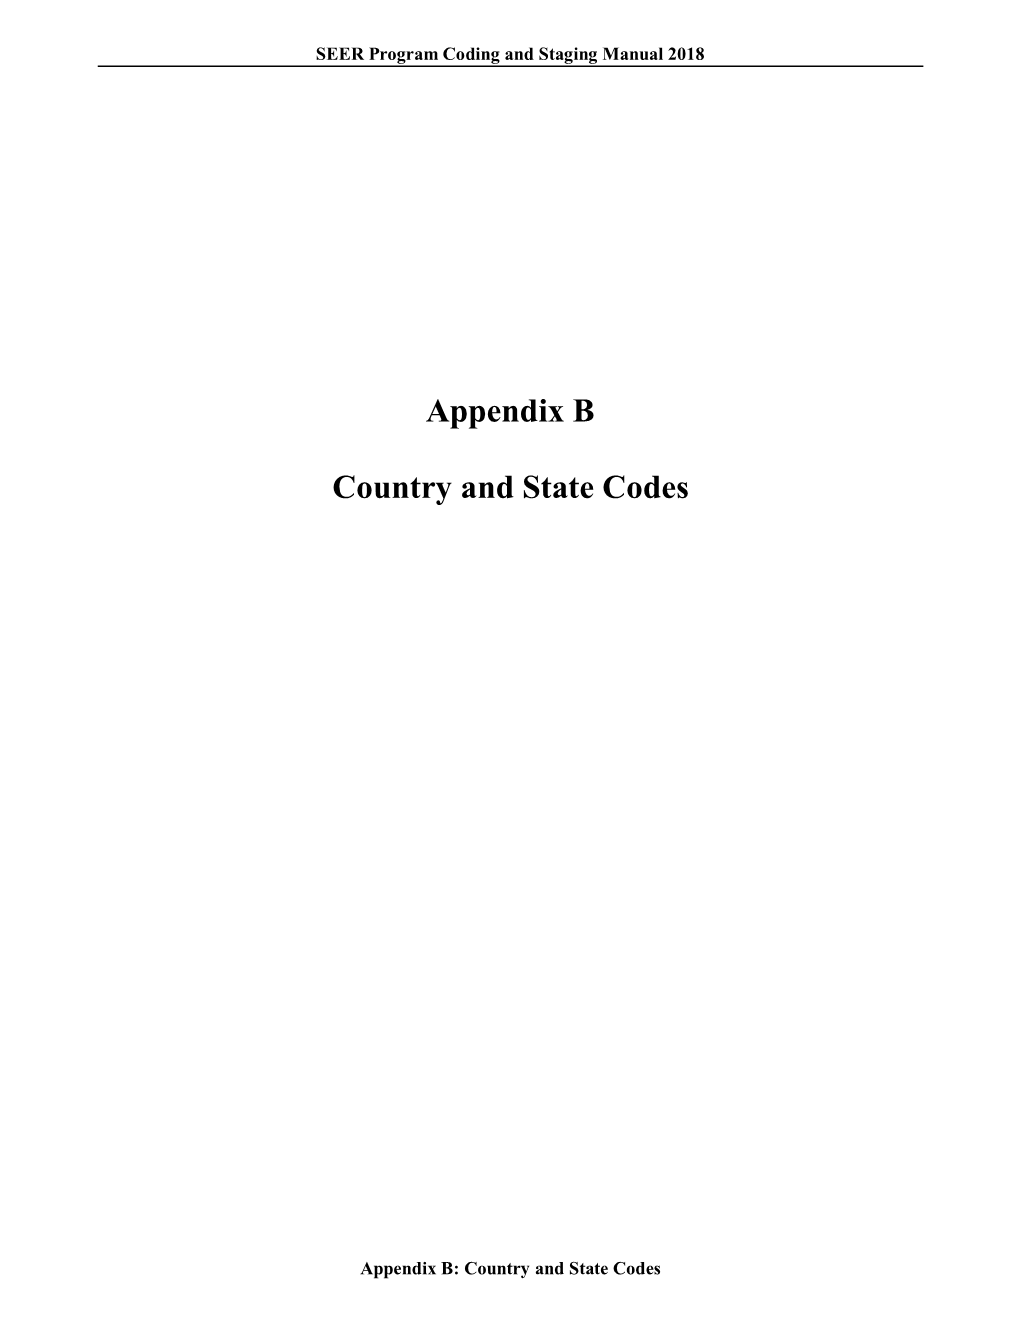 Appendix B Country and State Codes